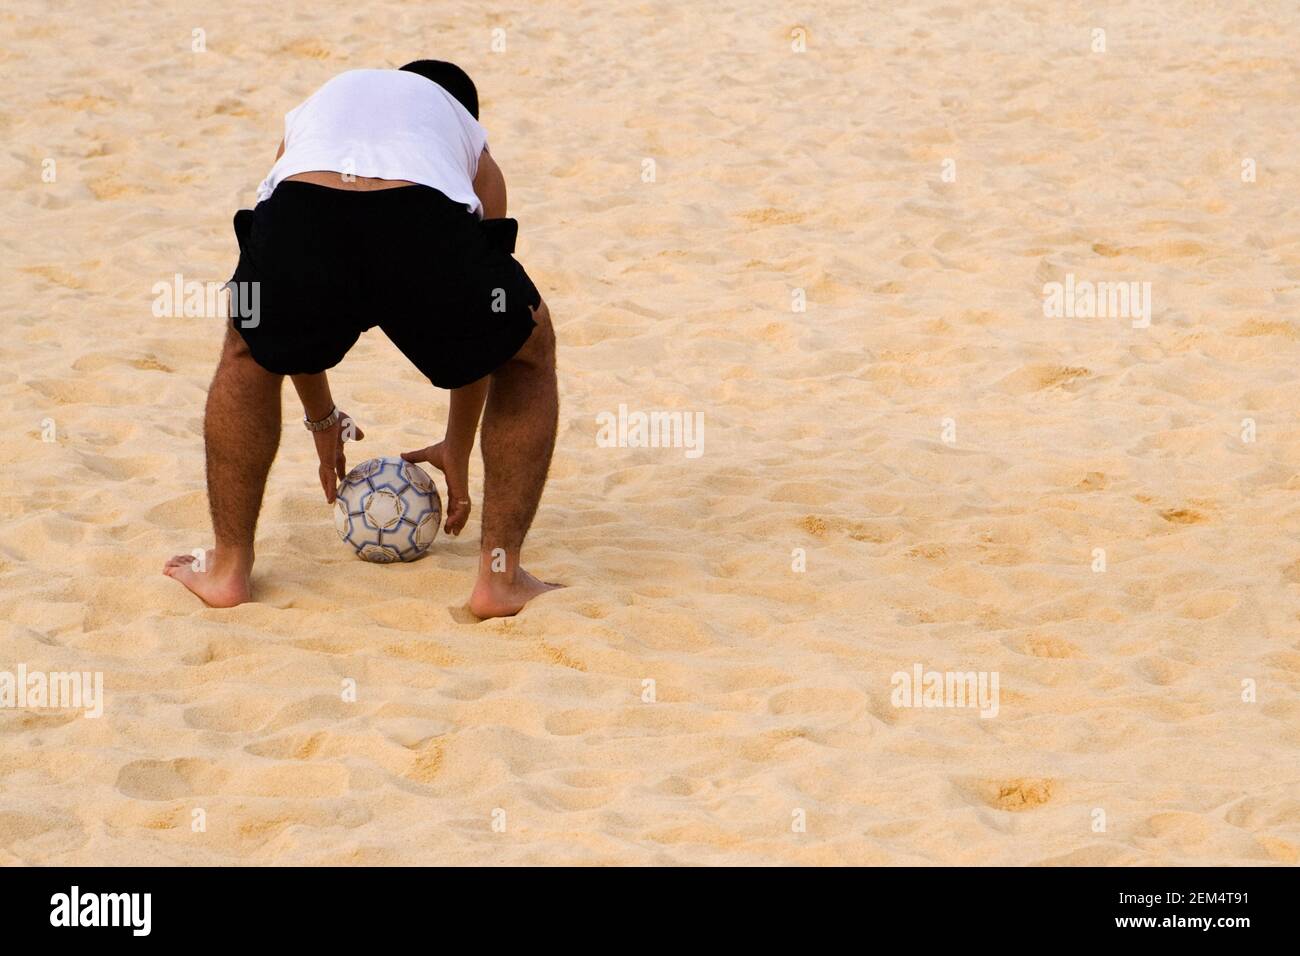 Rear view of a man picking up a beach ball Stock Photo